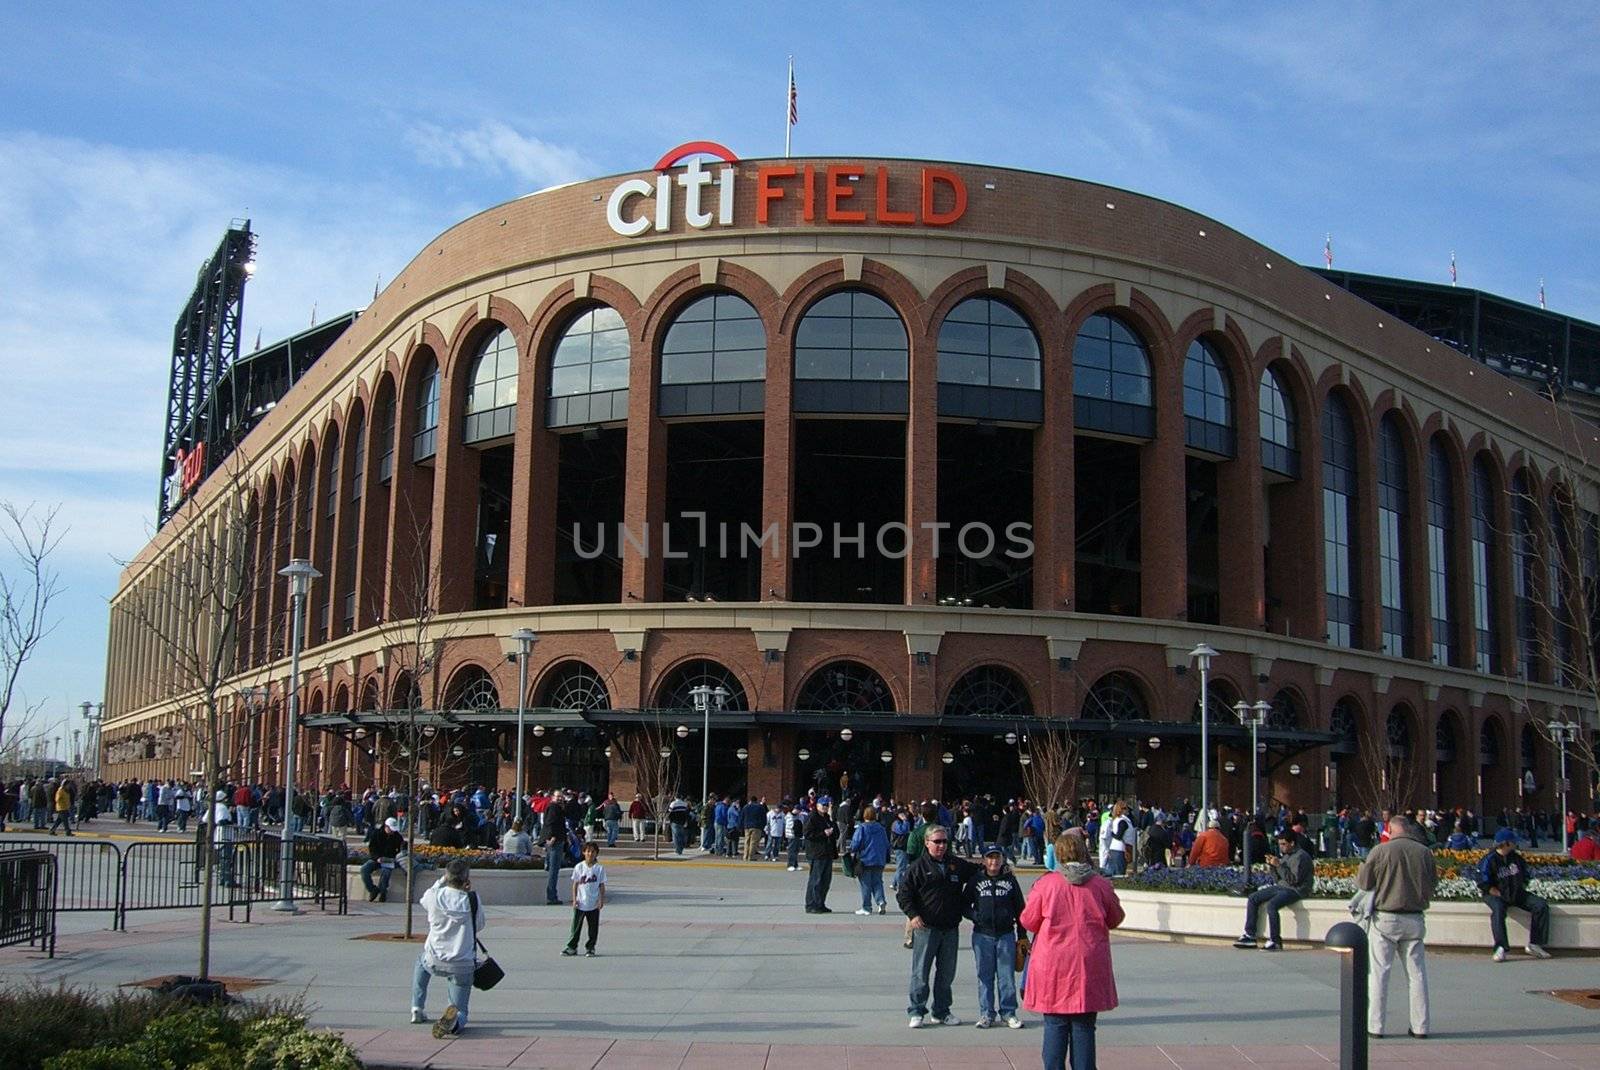 Made of concrete and old fashioned bricks, Citi Field during its first season